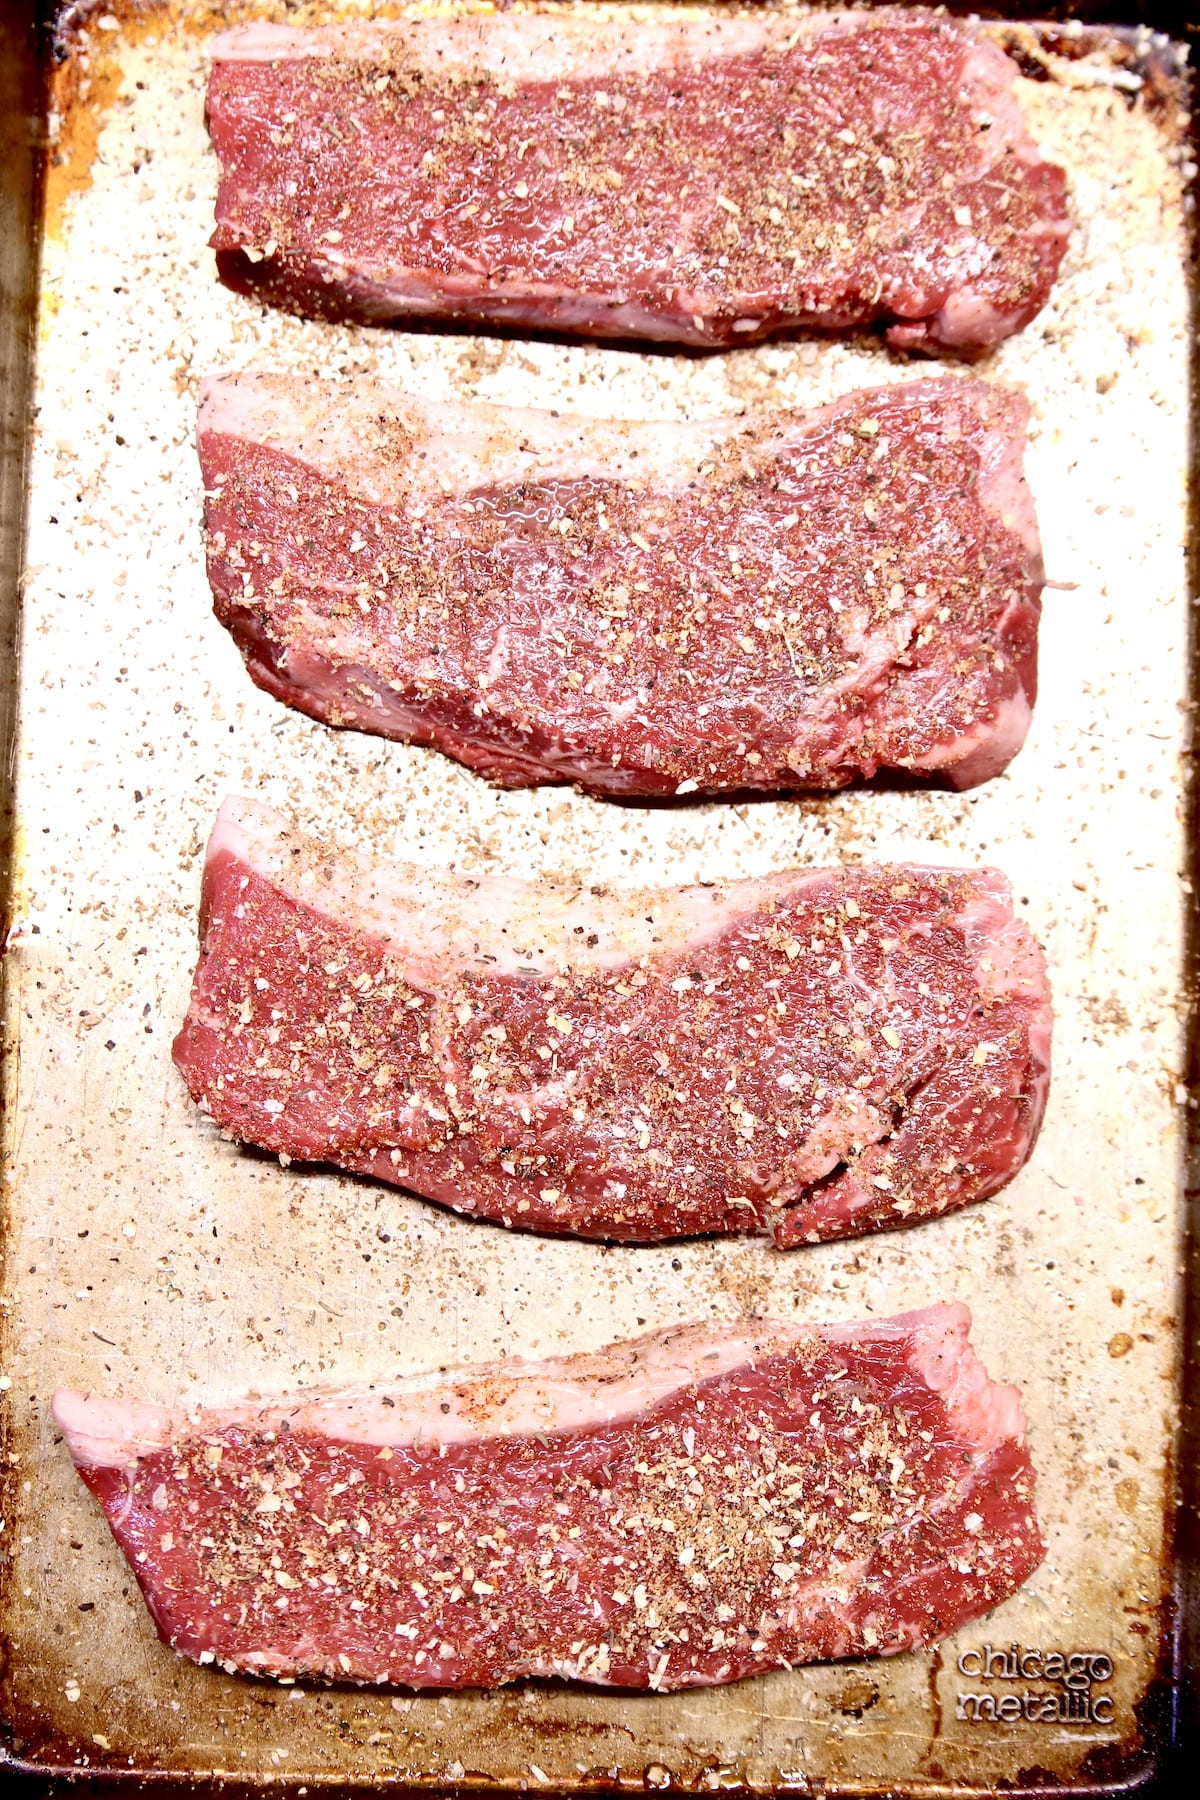 4 NY Strip Steaks with dry rub ready to grill